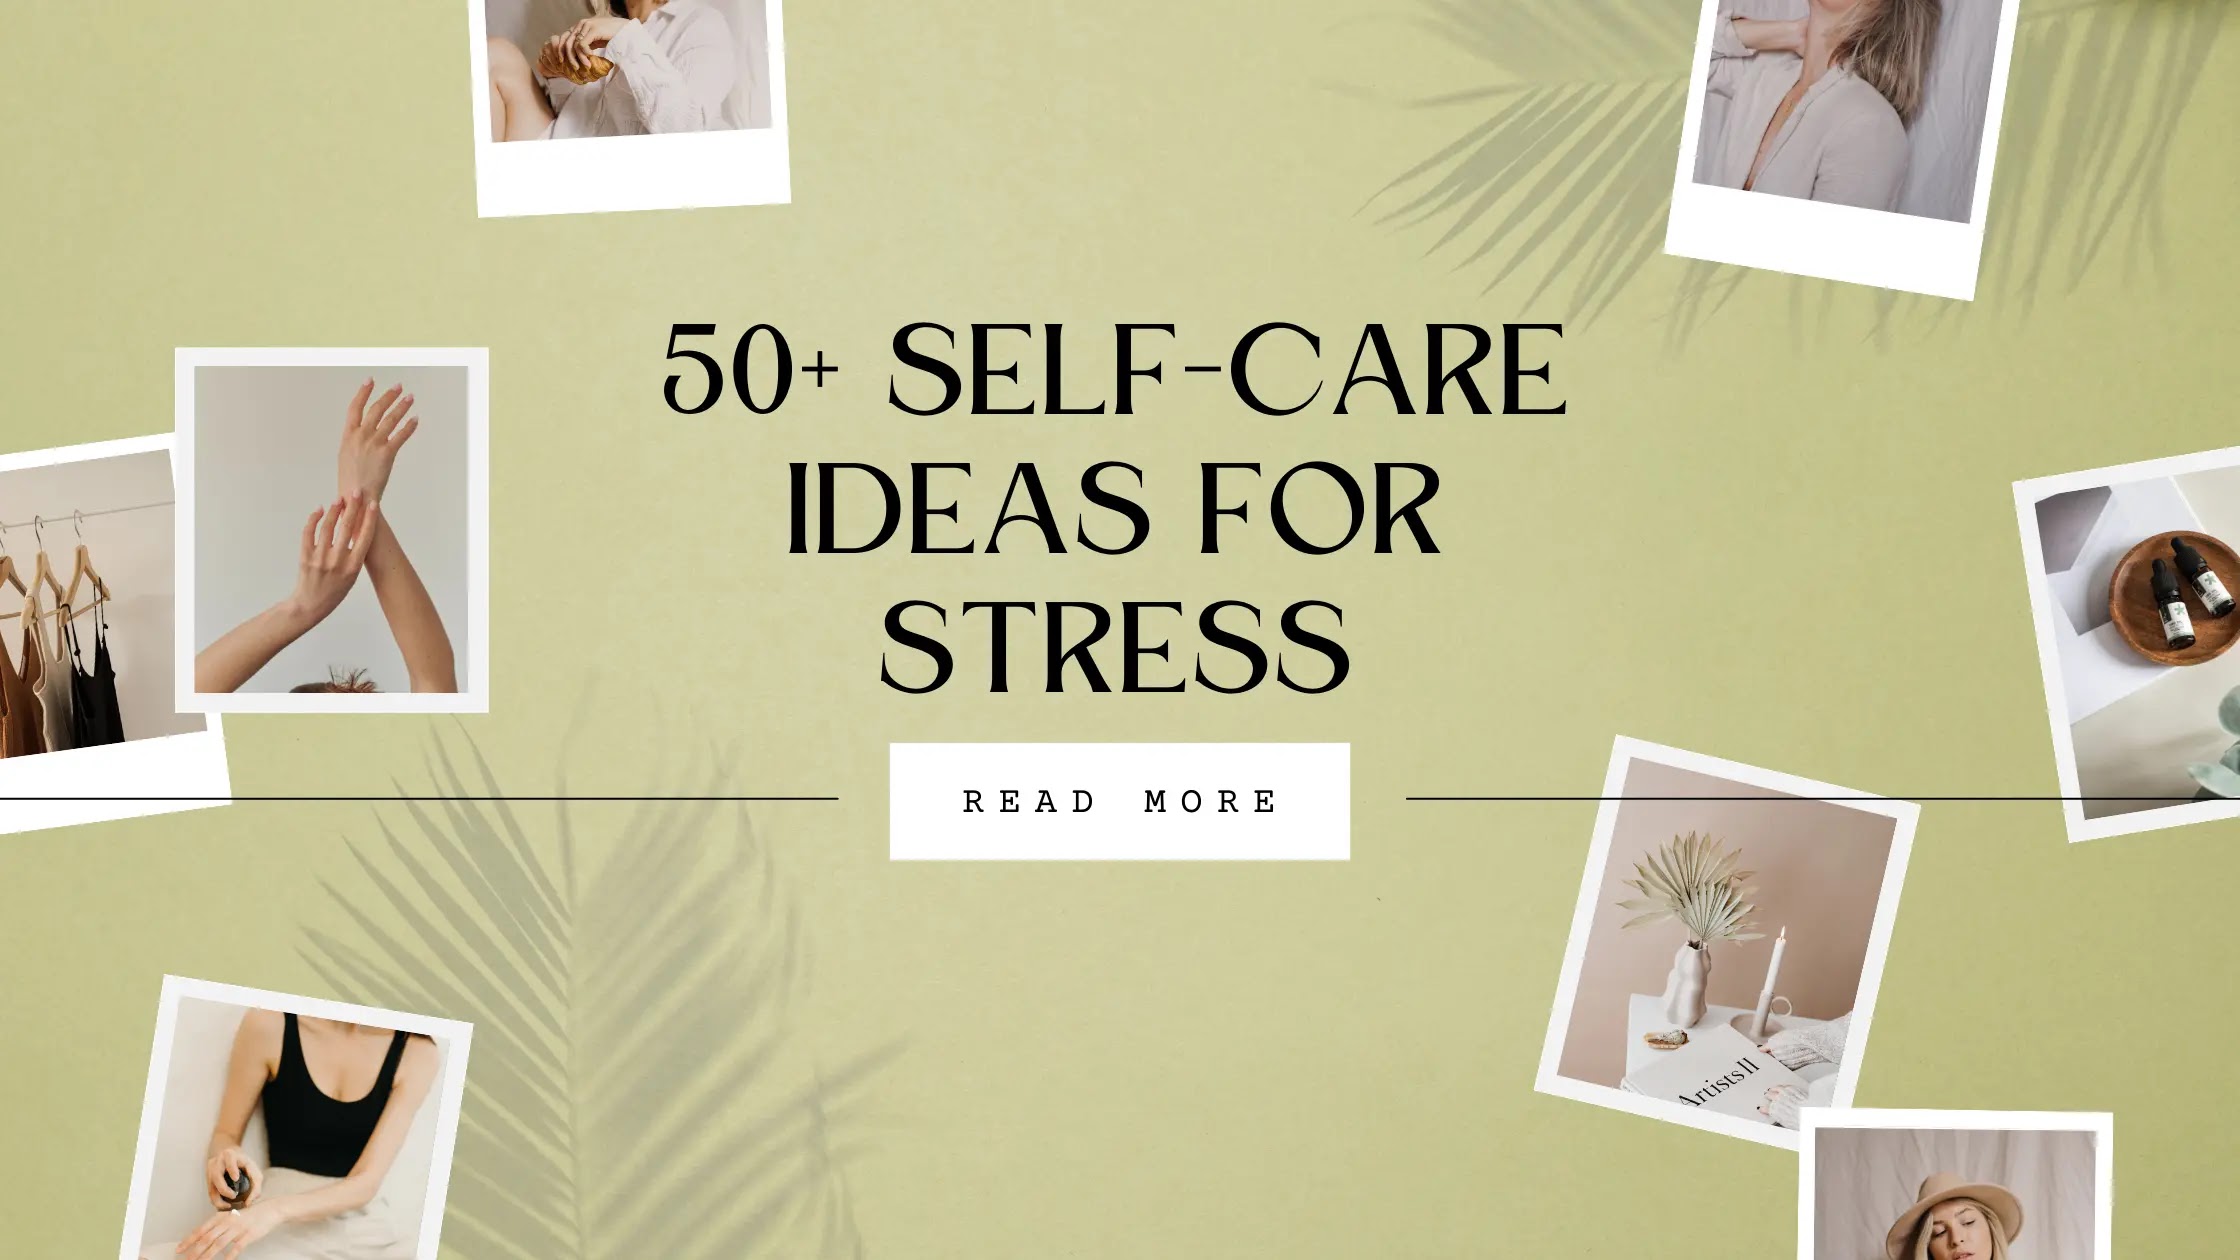 50+ self-care ideas for reducing stress